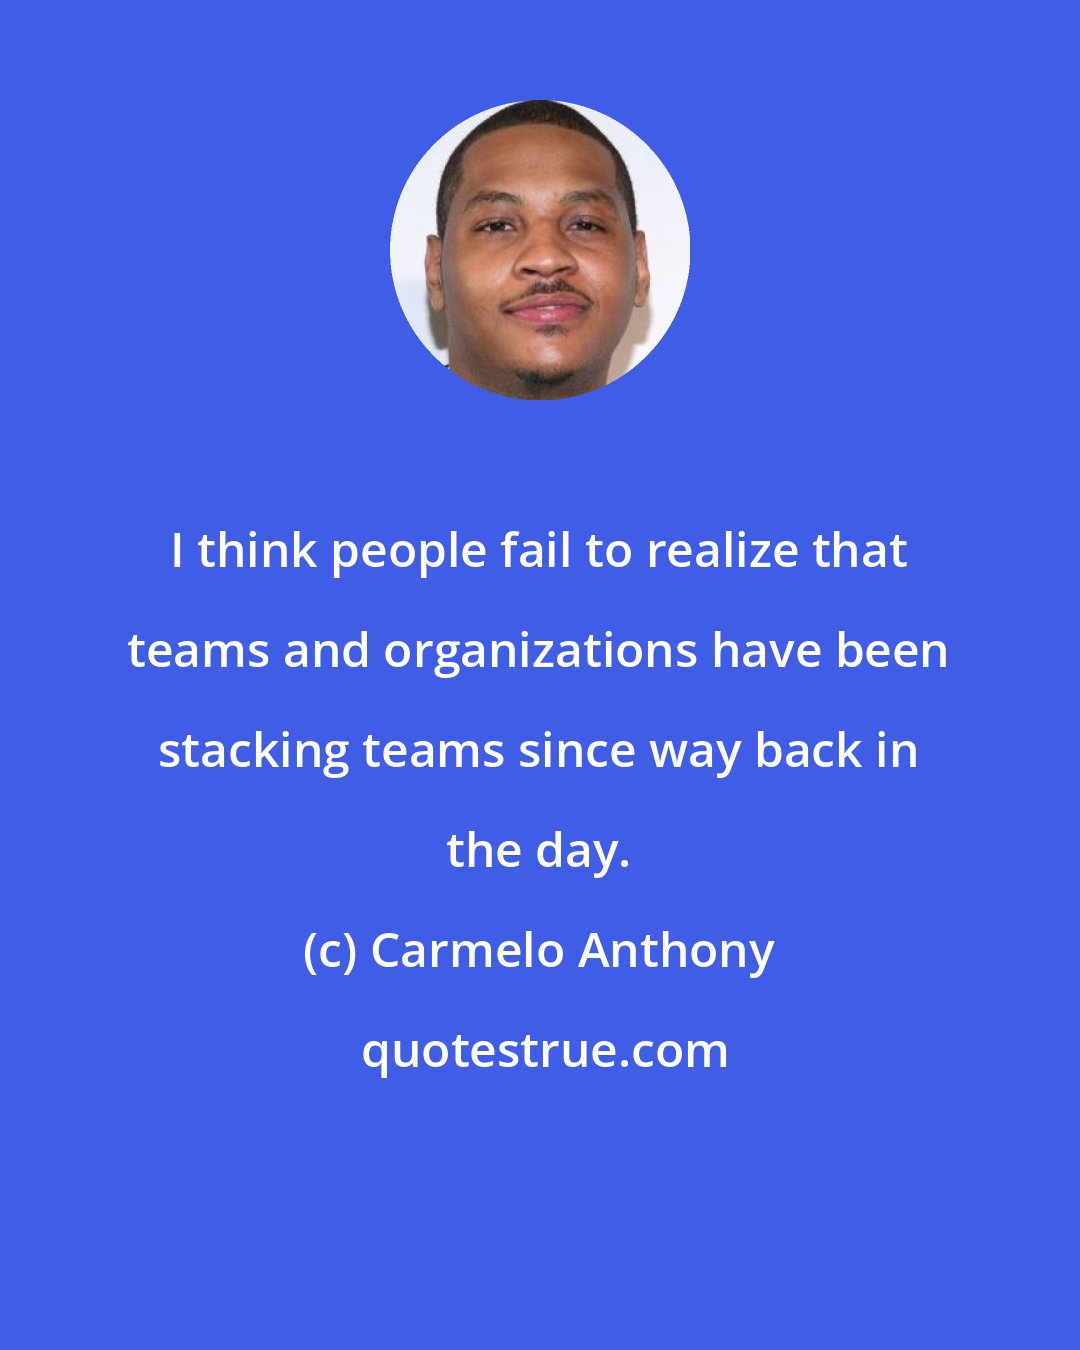 Carmelo Anthony: I think people fail to realize that teams and organizations have been stacking teams since way back in the day.